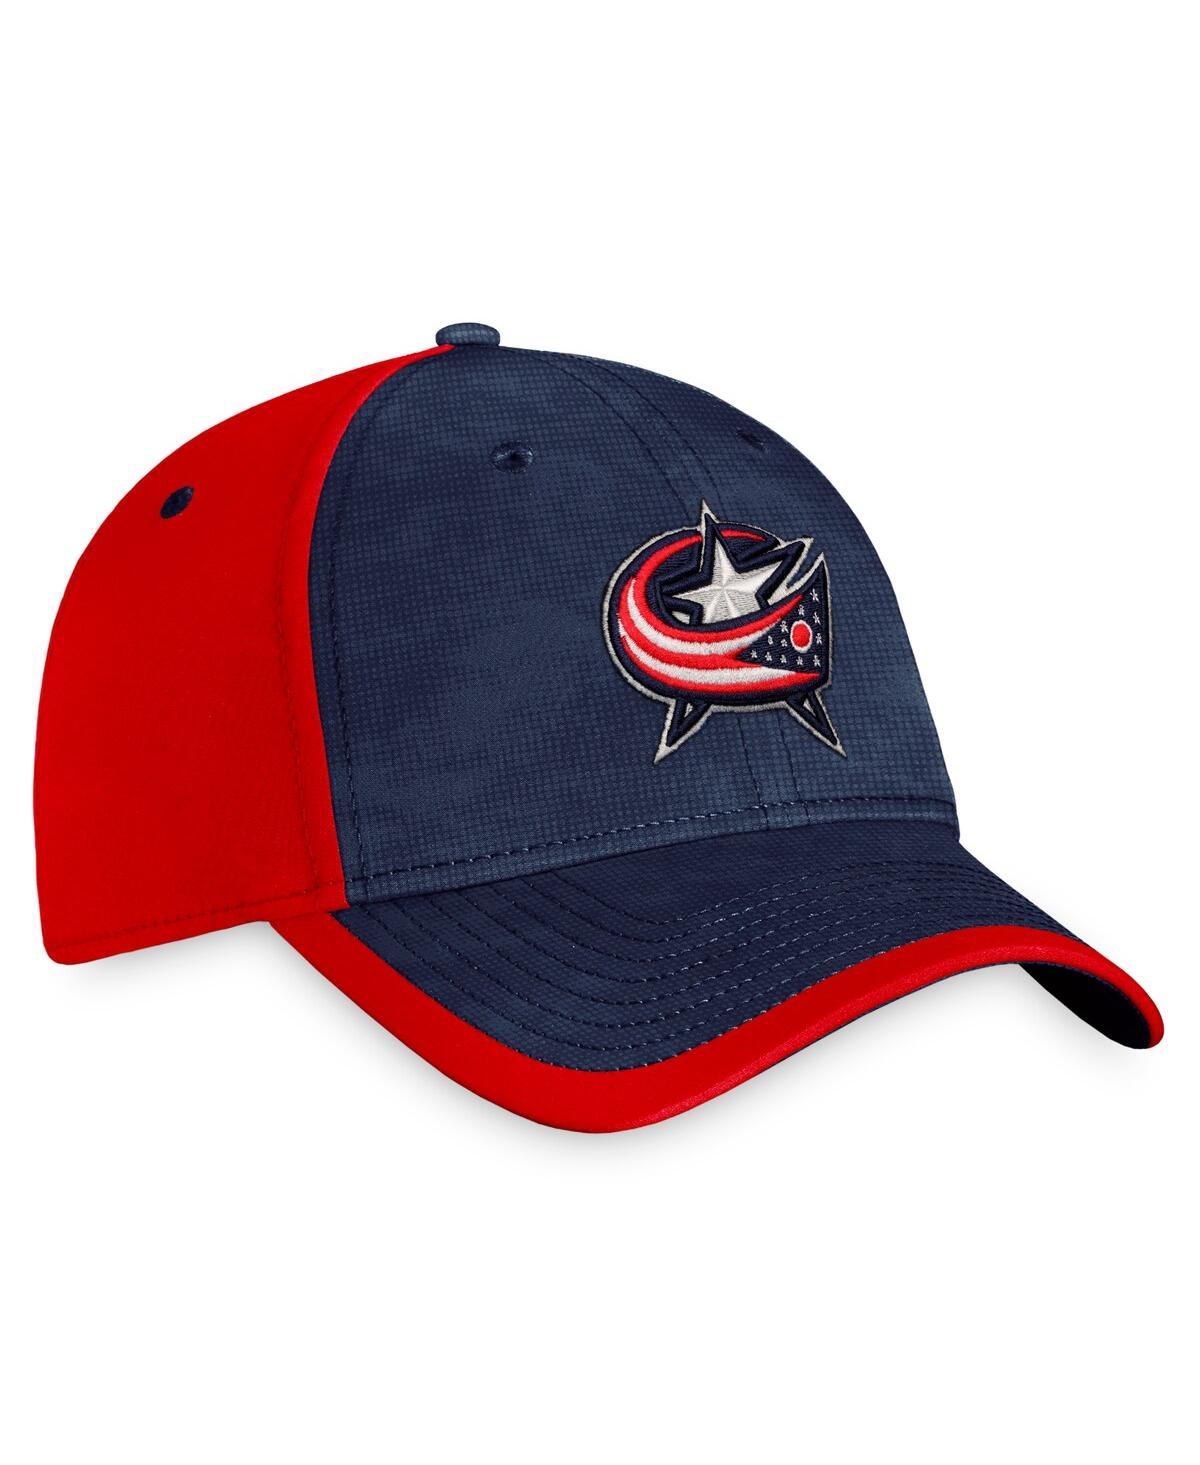 Shop Fanatics Men's  Navy, Red Columbus Blue Jackets Authentic Pro Rink Camo Flex Hat In Navy,red